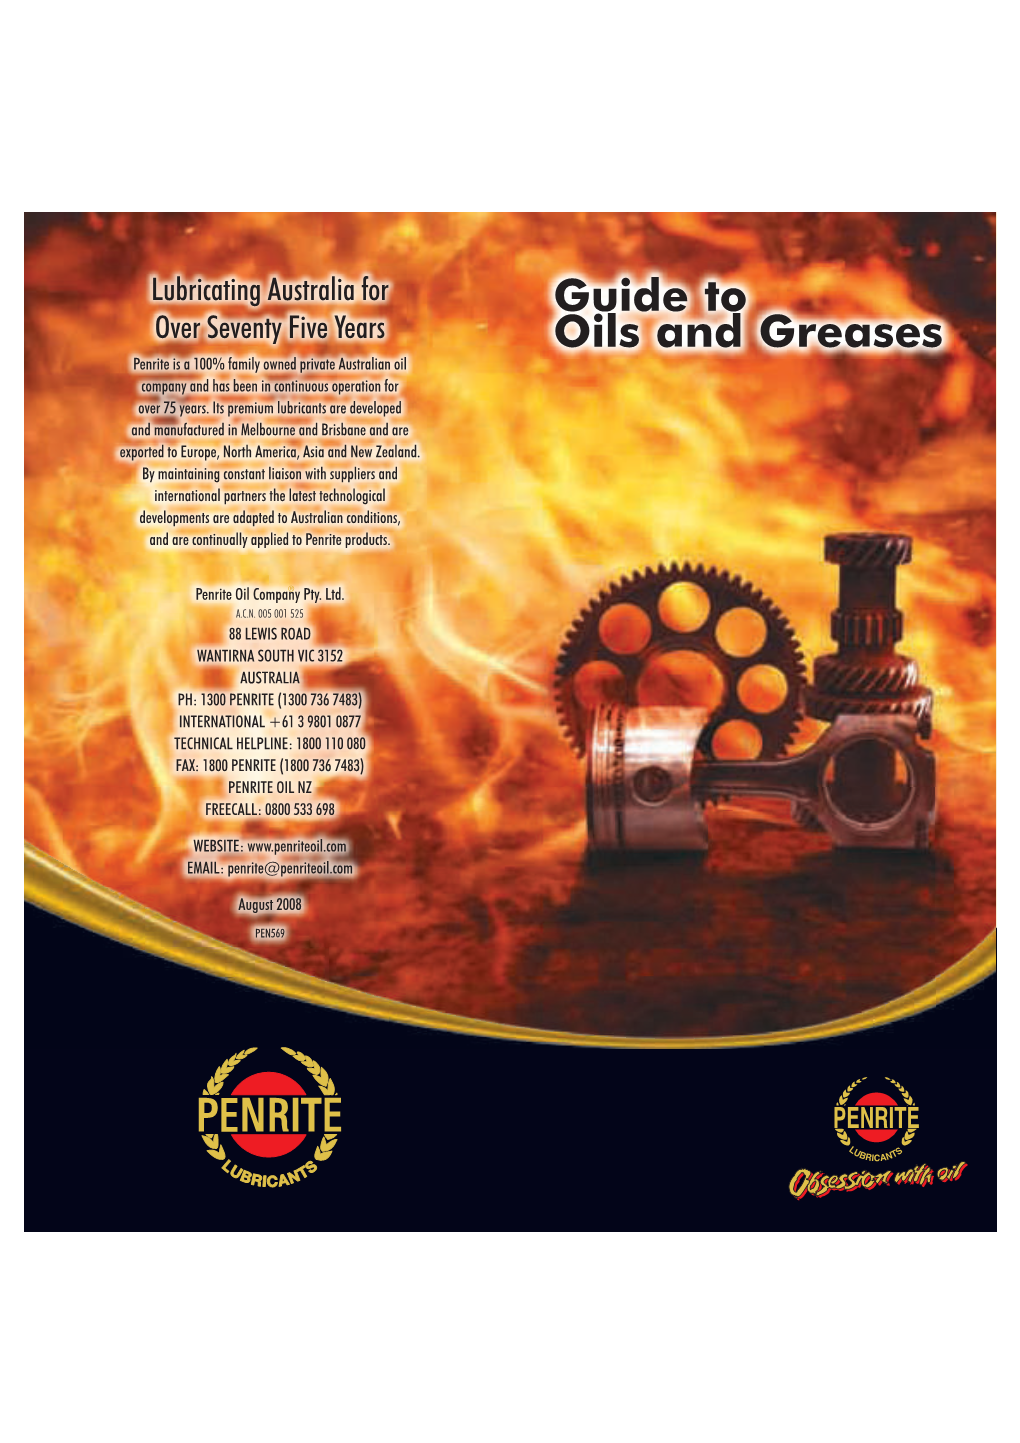 Guide to Oils and Greases